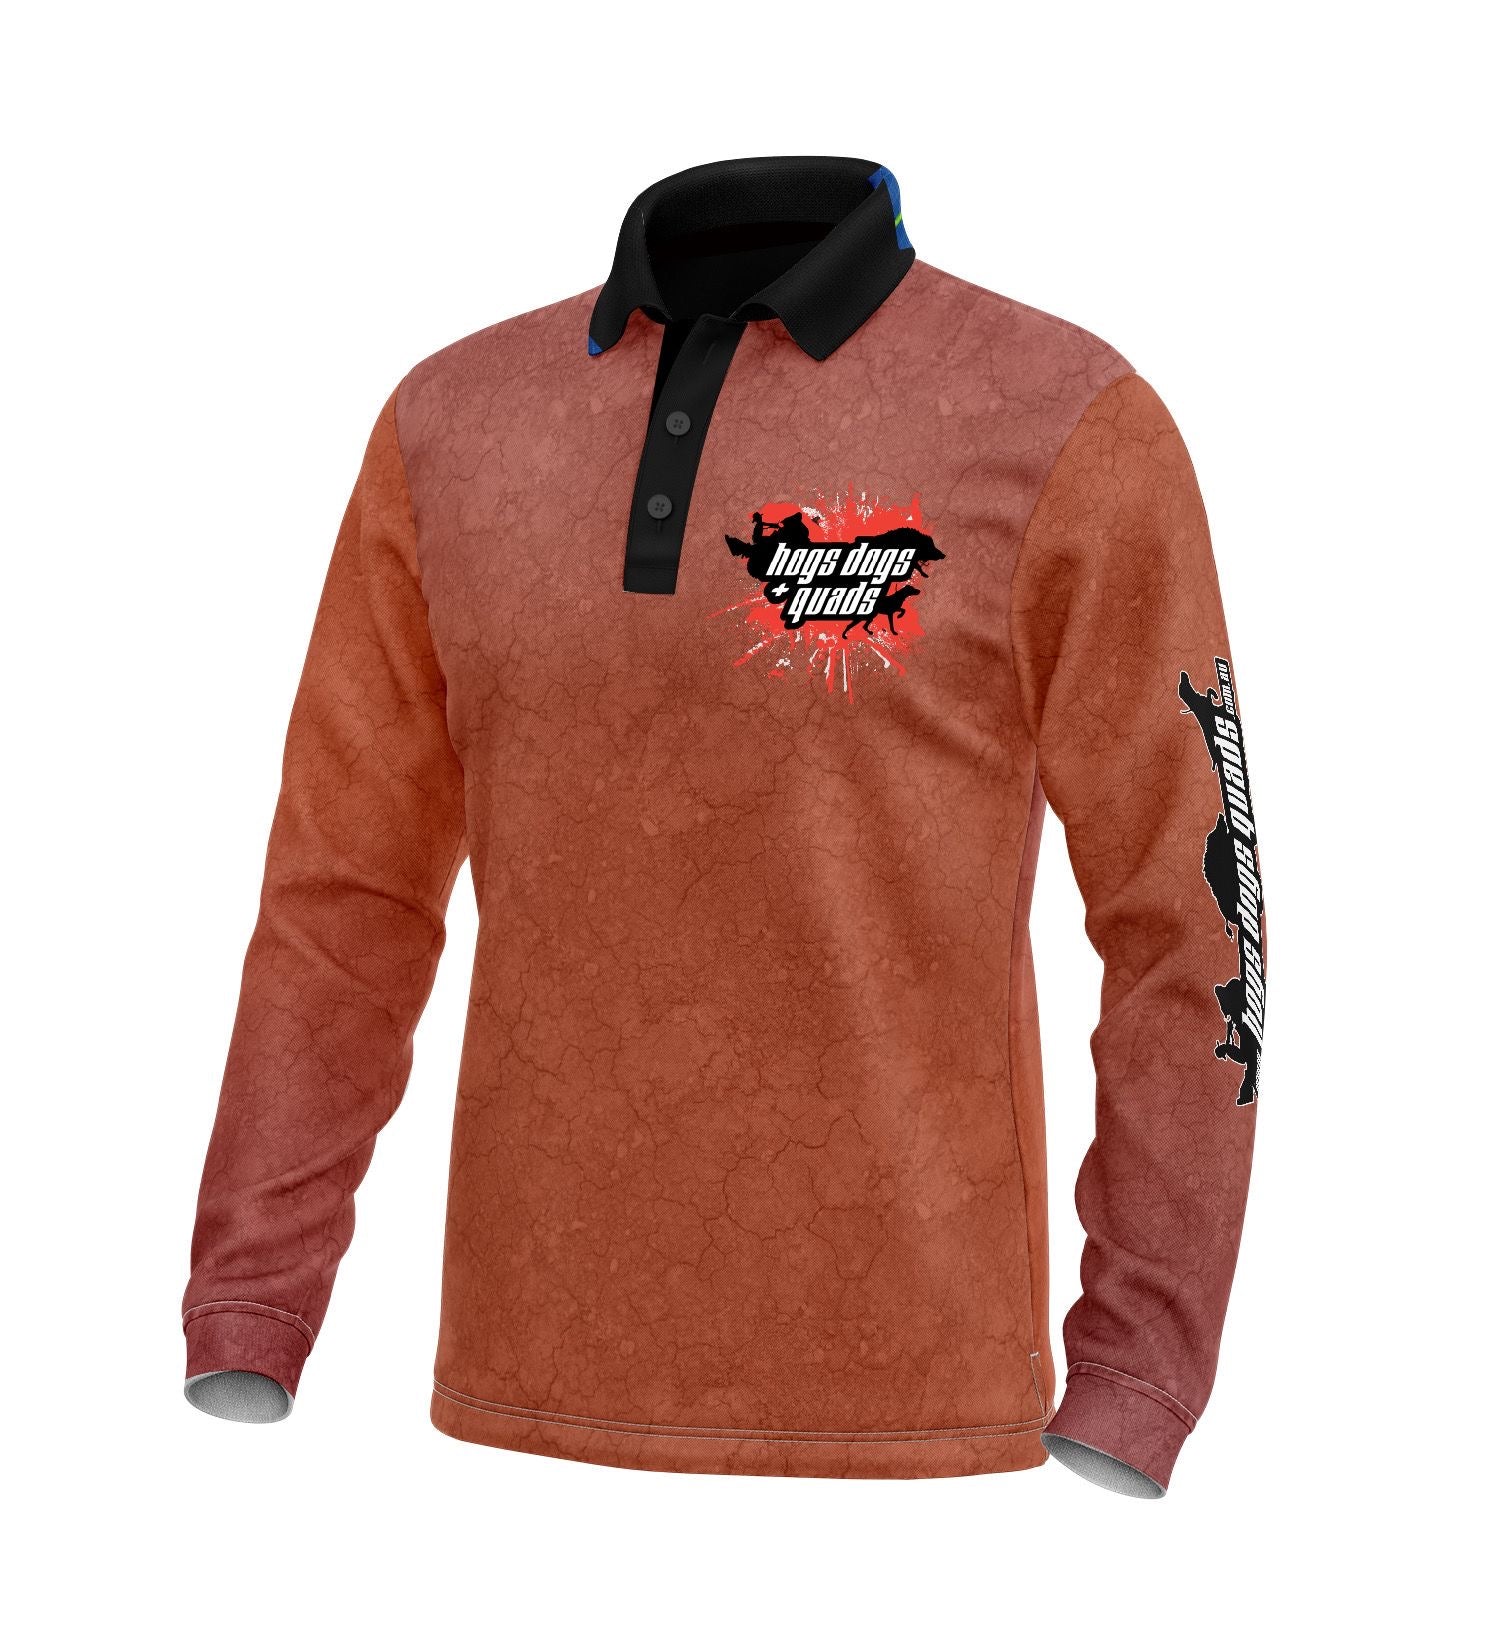 **NEW** IF YOU’RE NOT HEADING NORTH.. LONG SLEEVE - Hogs Dogs Quads Shop